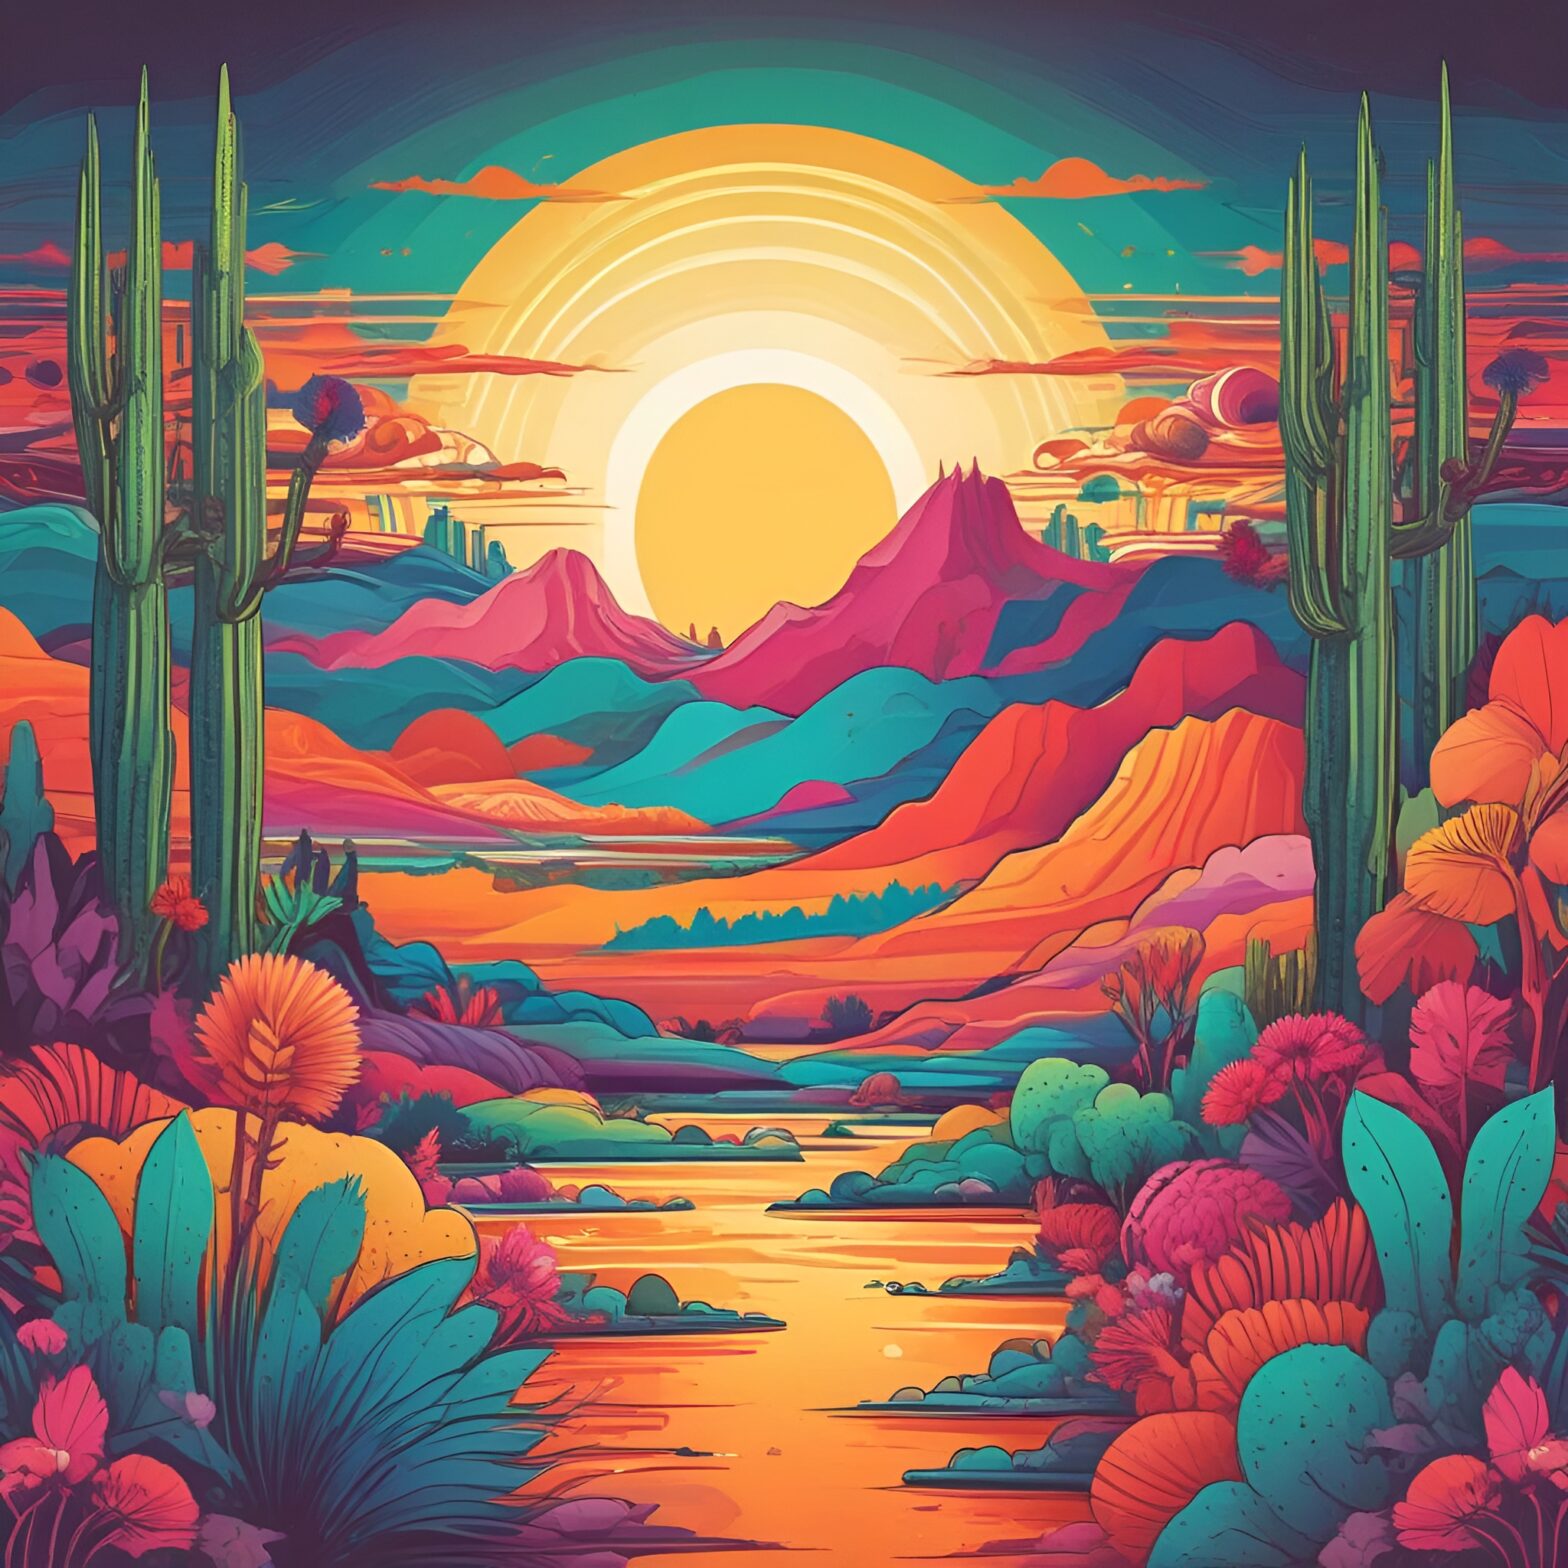 This vibrant and inspiring abstract artwork captures the essence of the desert's energy, the resilience of nature, and the potential for a bright future. It symbolizes the innovative spirit and the ability to rise above challenges with renewed strength and determination. Deserts can embody personal growth, self discovery, and the power to overcome obstacles tapping into our inner strength and wisdom. They can encourage us to break free from the noise and distractions of the world, finding clarity and purpose in our own journeys.